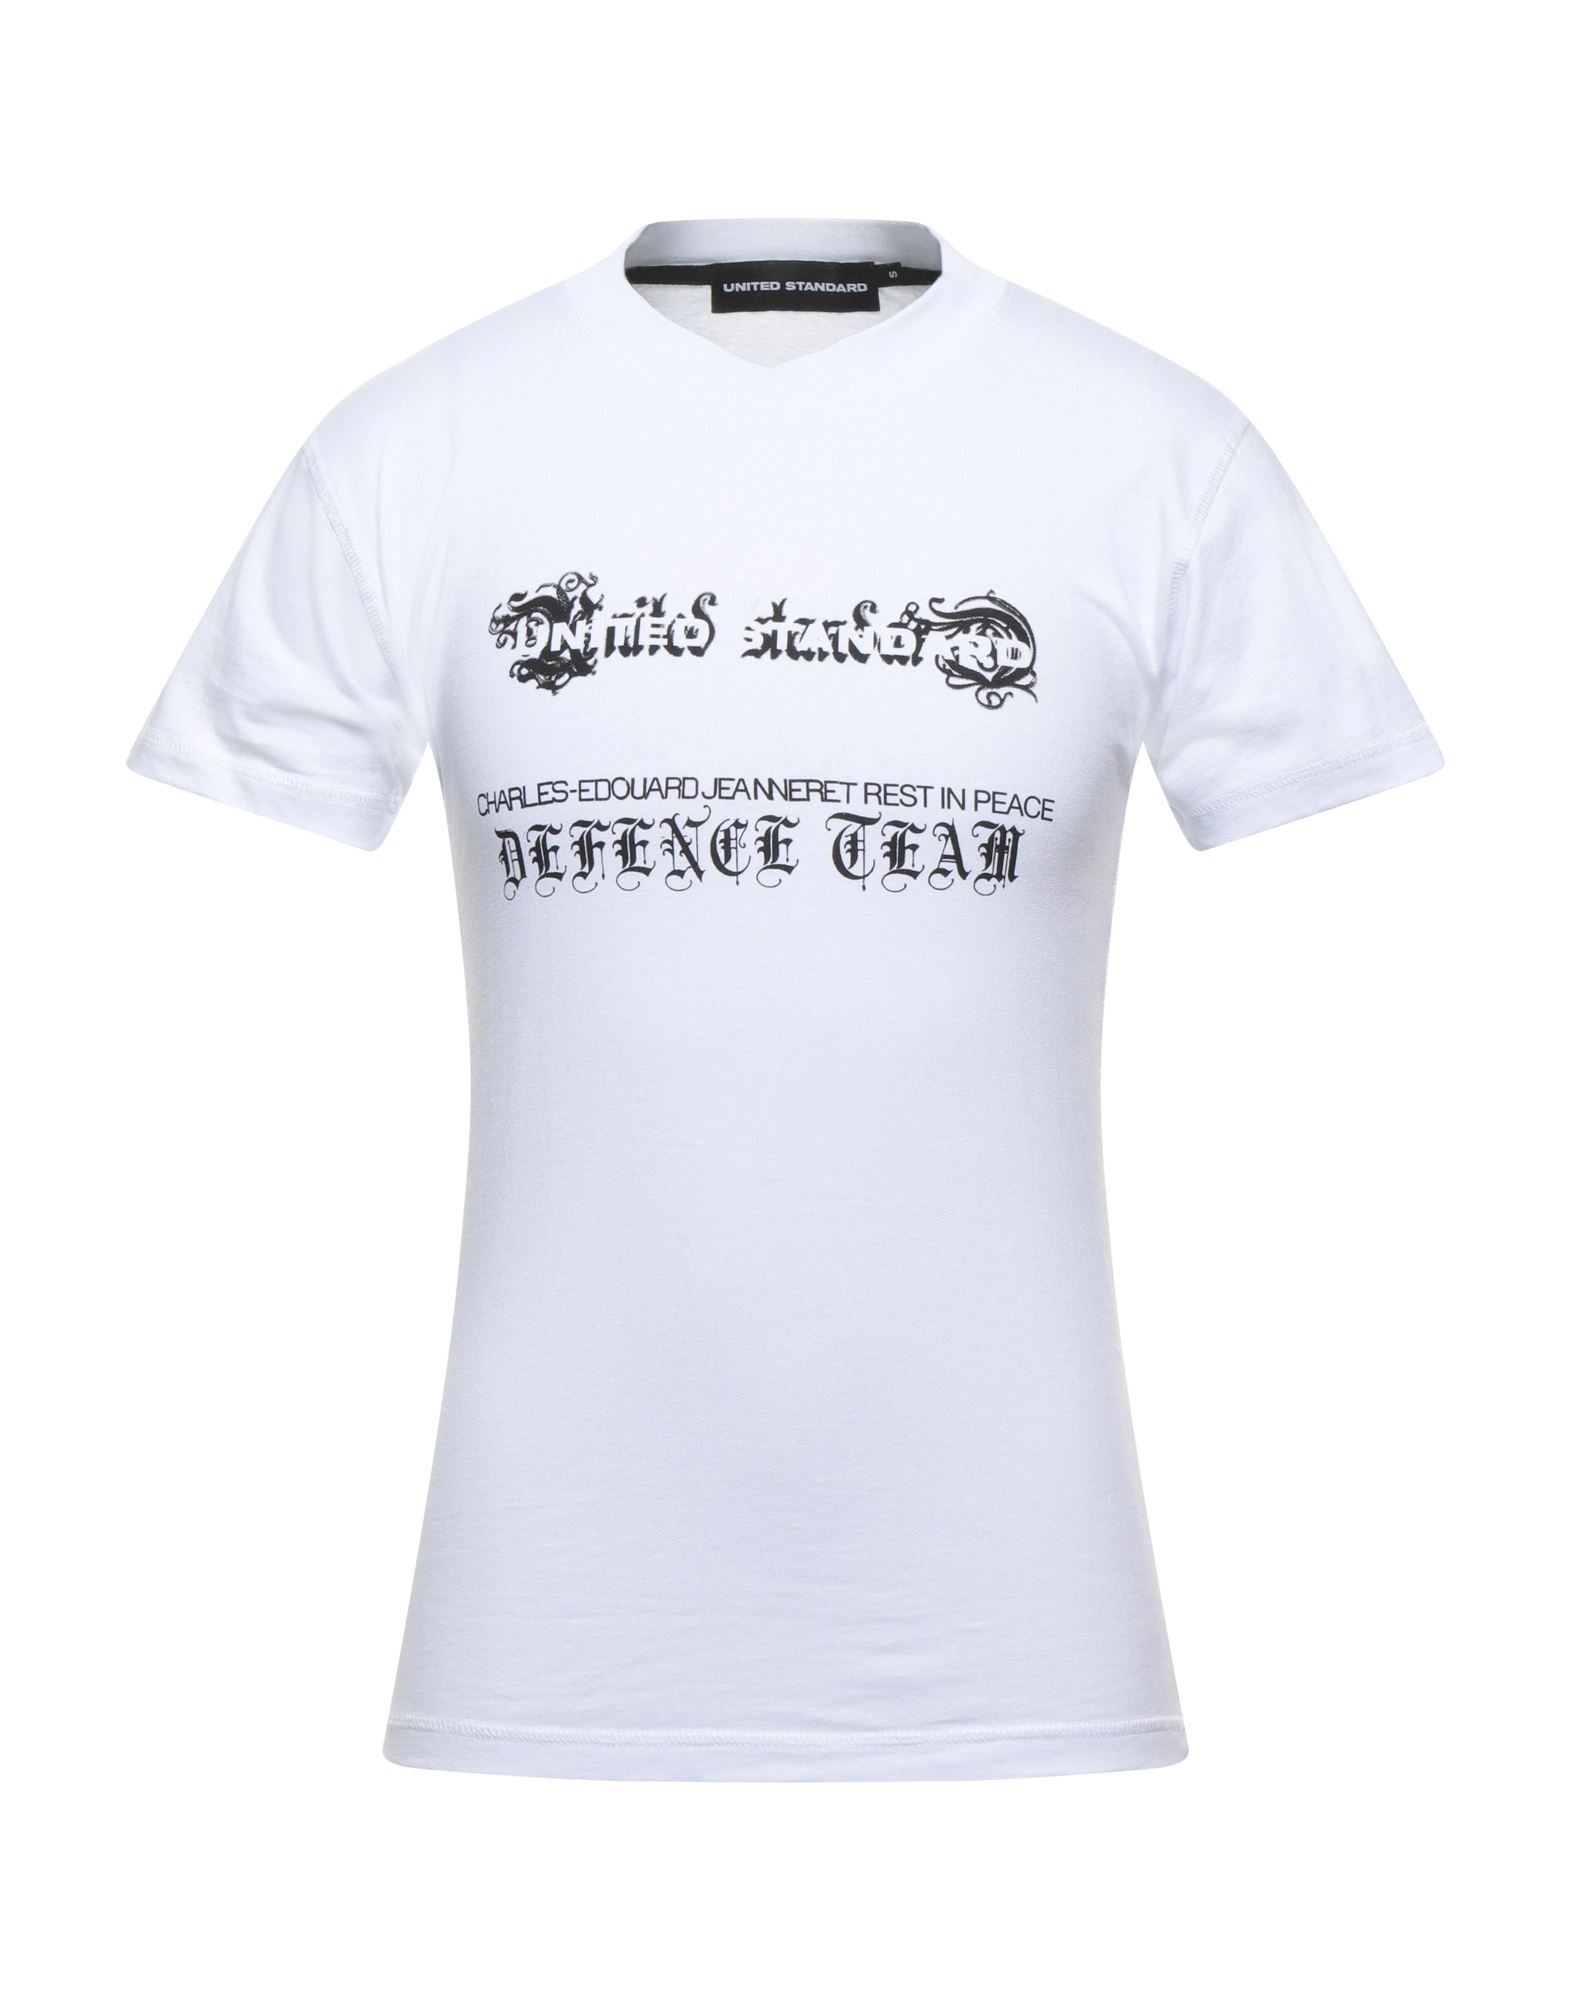 United Standard T-shirts In White